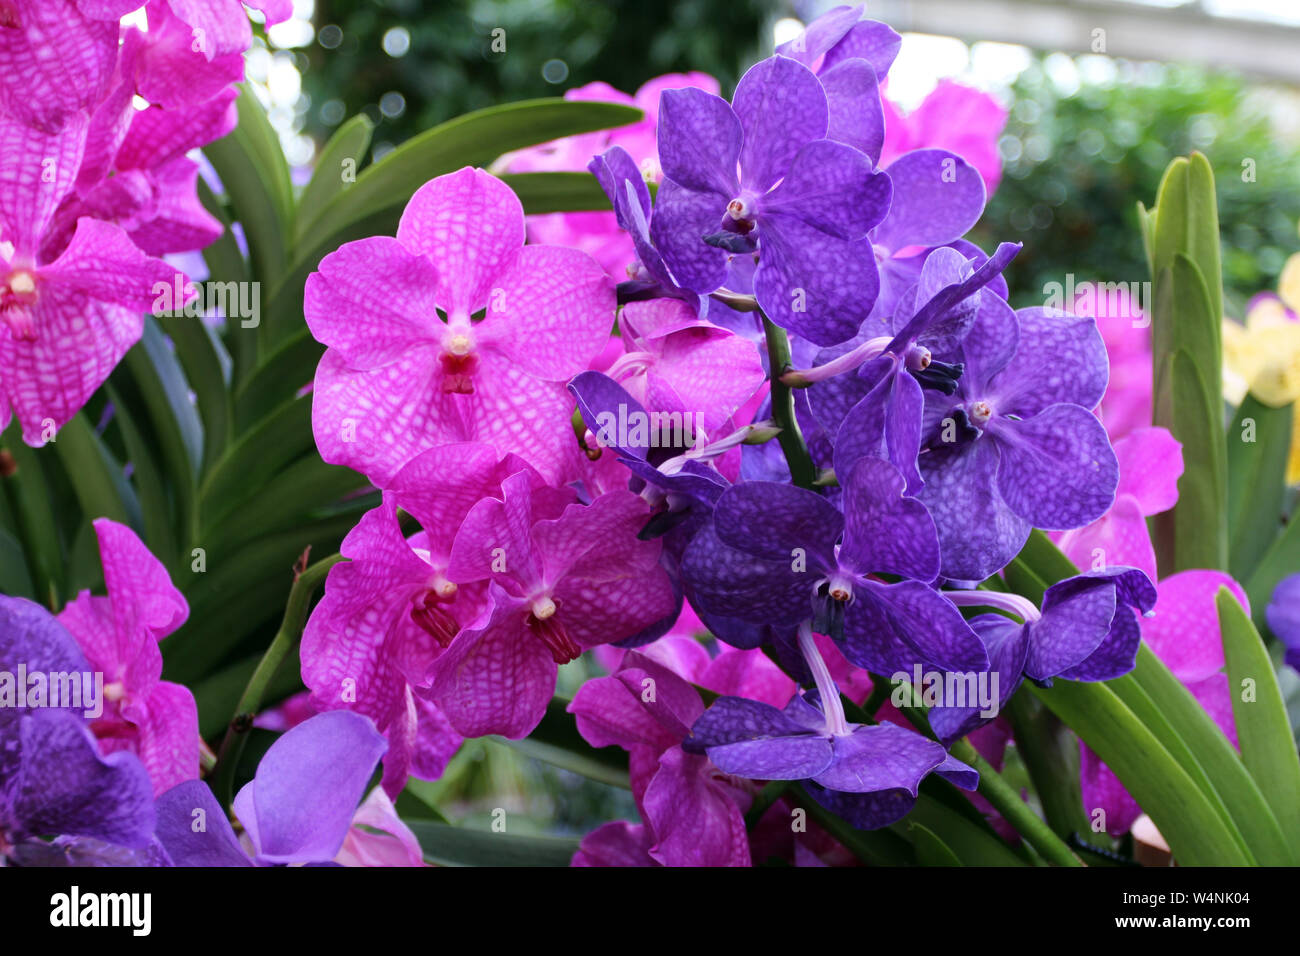 Blooming purple and pink Vanda Orchids with a blurred background Stock Photo